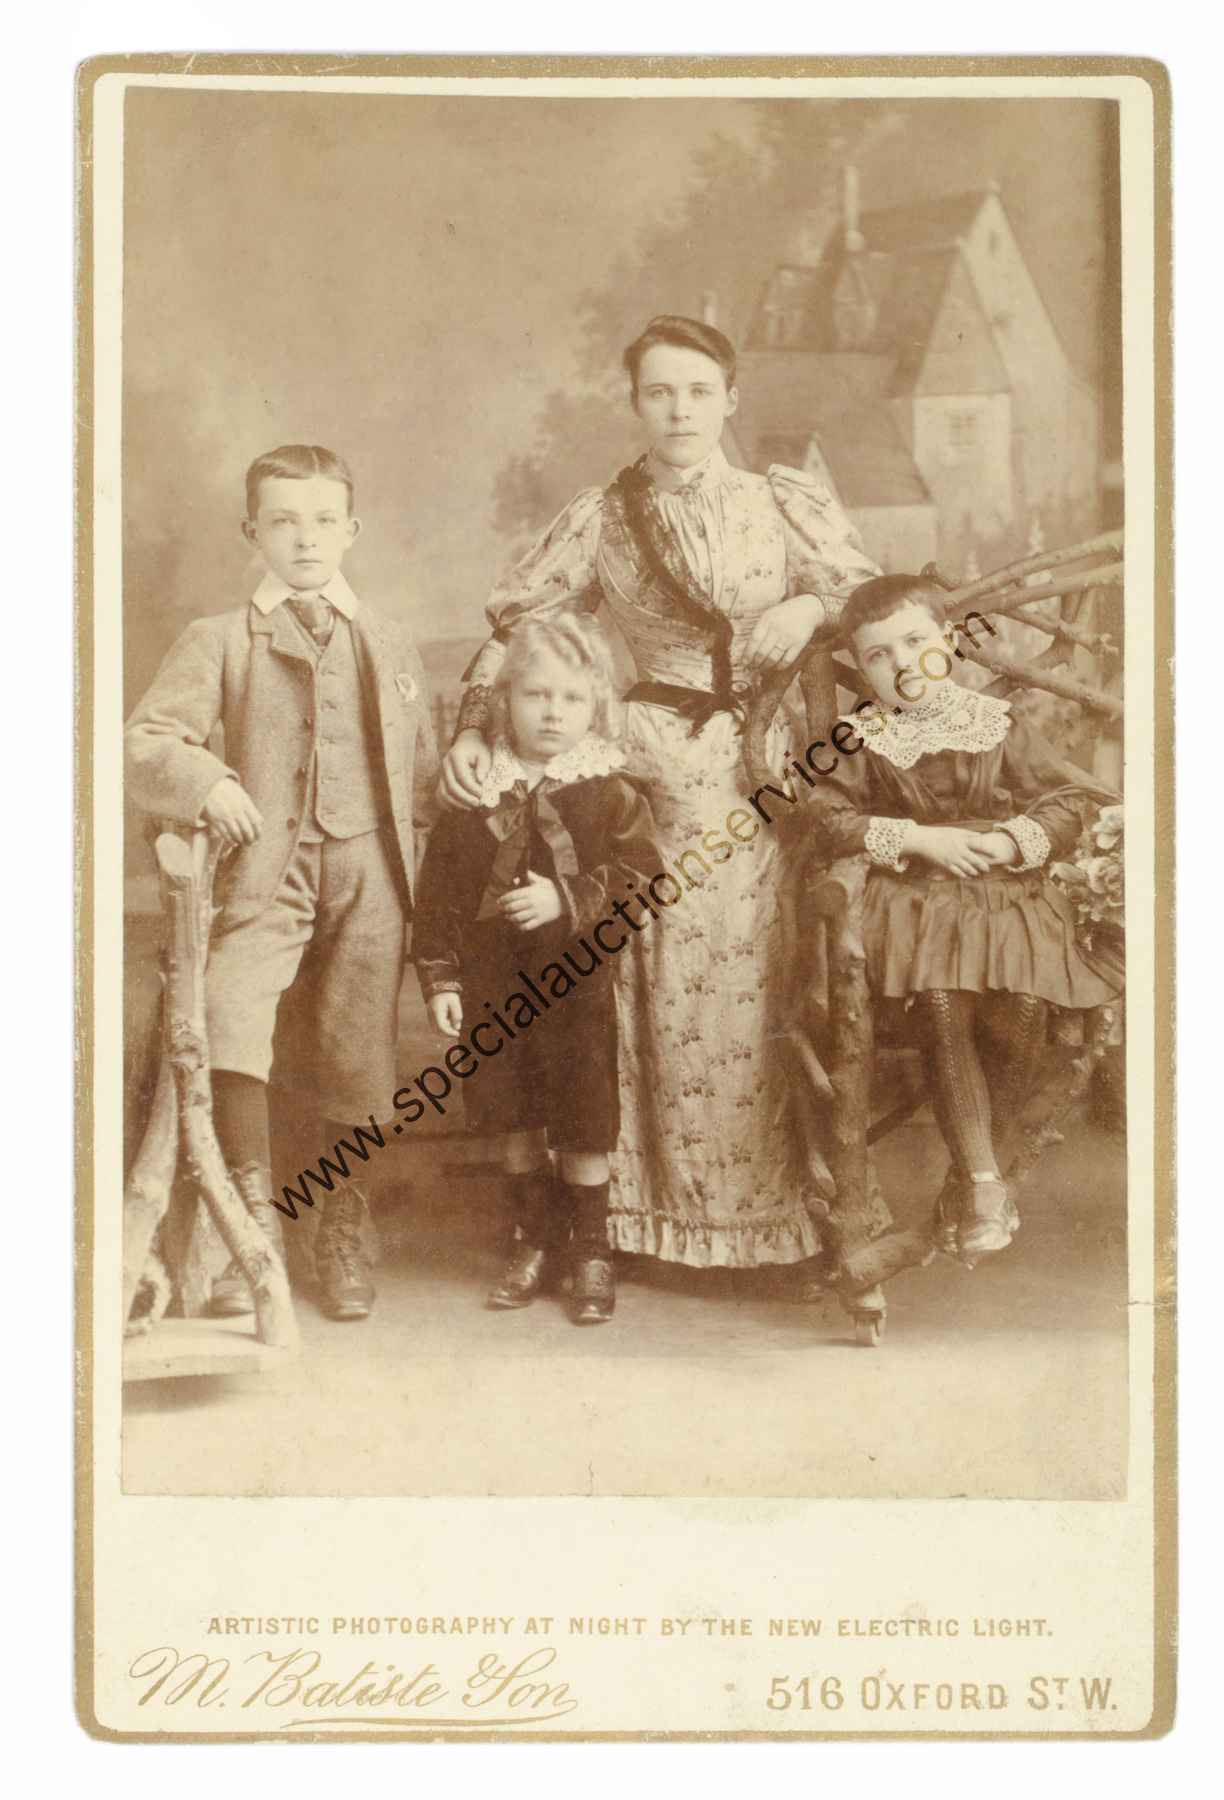 Cabinet Card Portraits London Photographers - Children, Fred Hollyer (1), others (21), F-VG (22) - Image 3 of 3